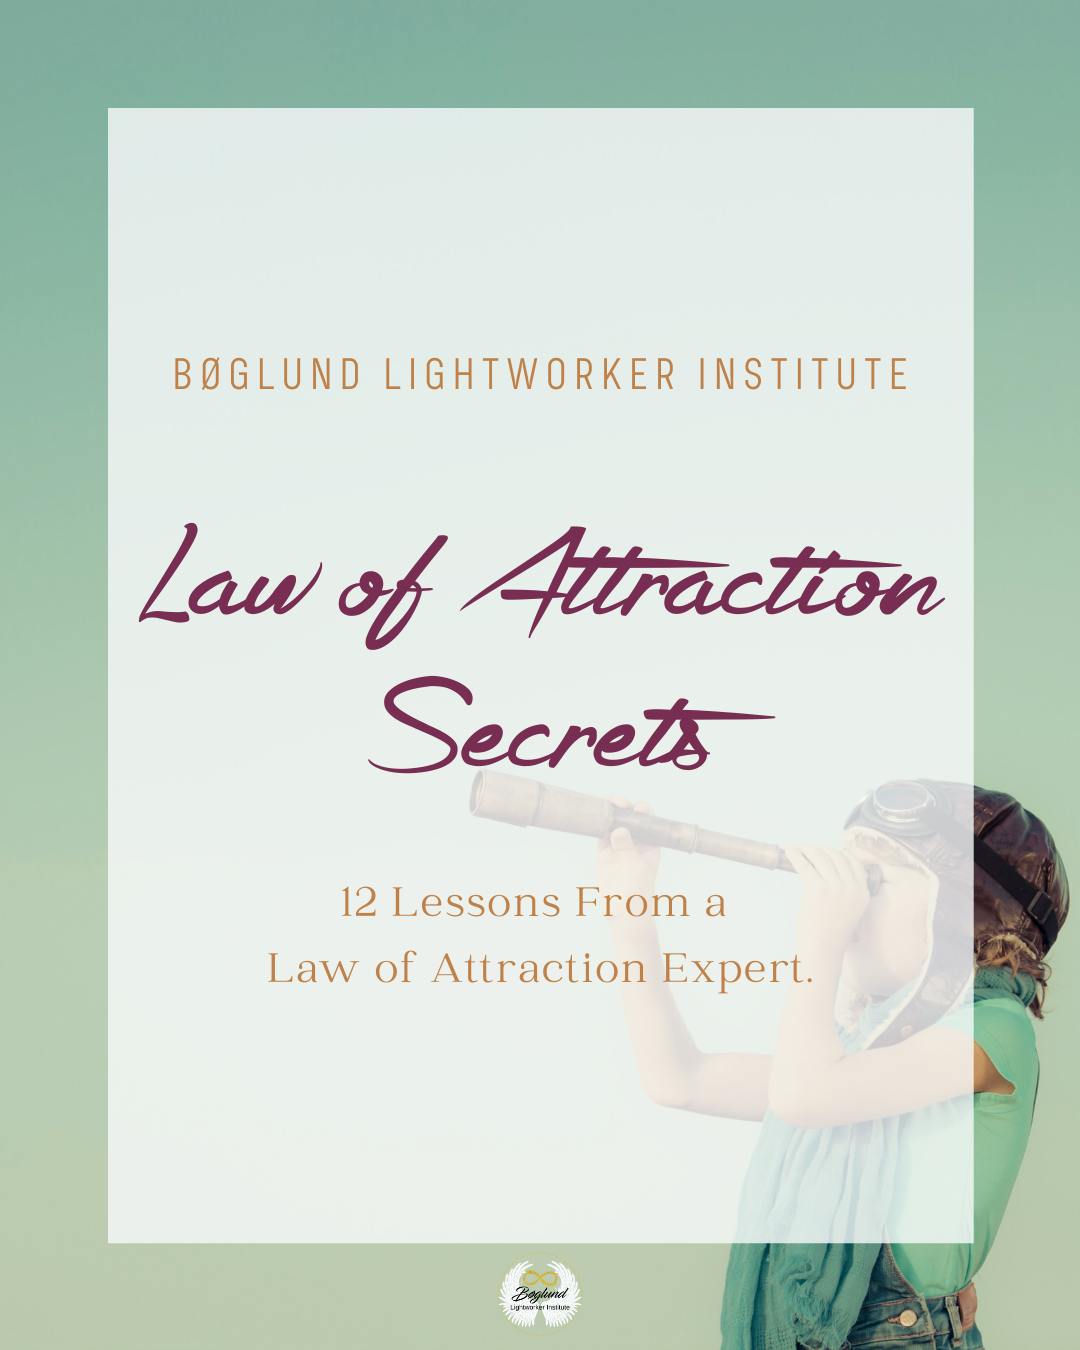 [GUIDE] 12 Lessons From a Law of Attraction Expert